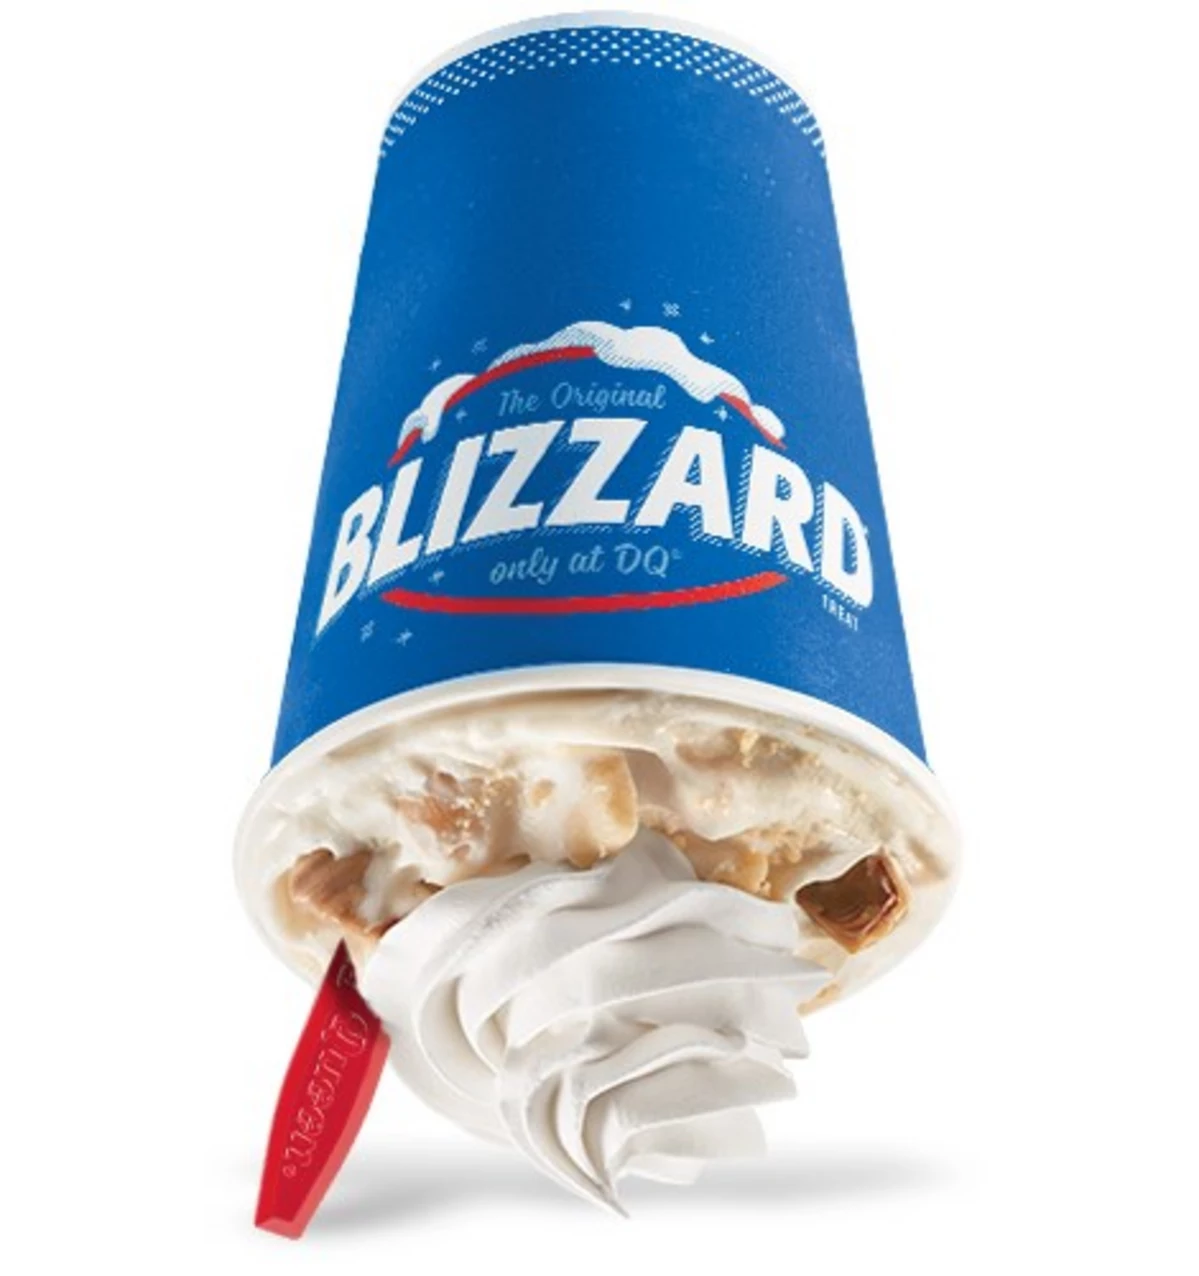 Dairy Queen Offering Free Blizzards To Vets On Veterans Day